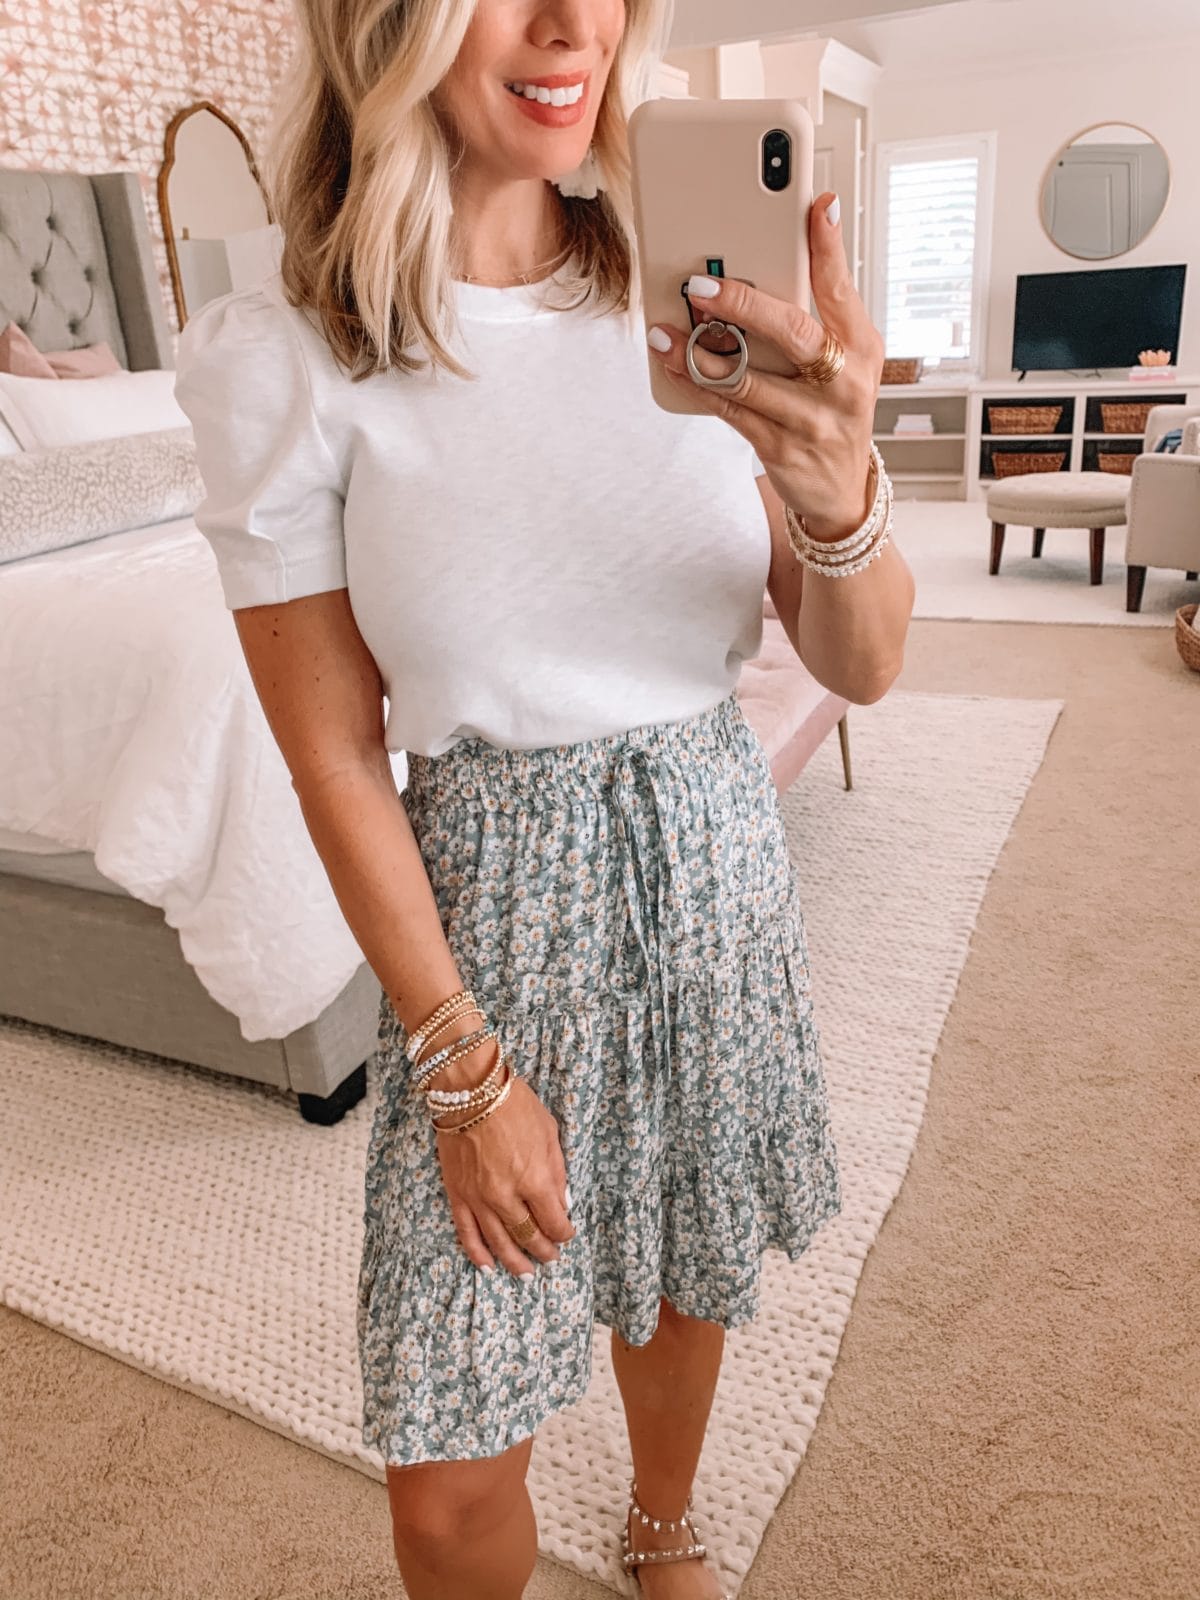 Amazon Fashion Finds, White Puff Sleeve Top, Floral Skirt, Studded Sandals